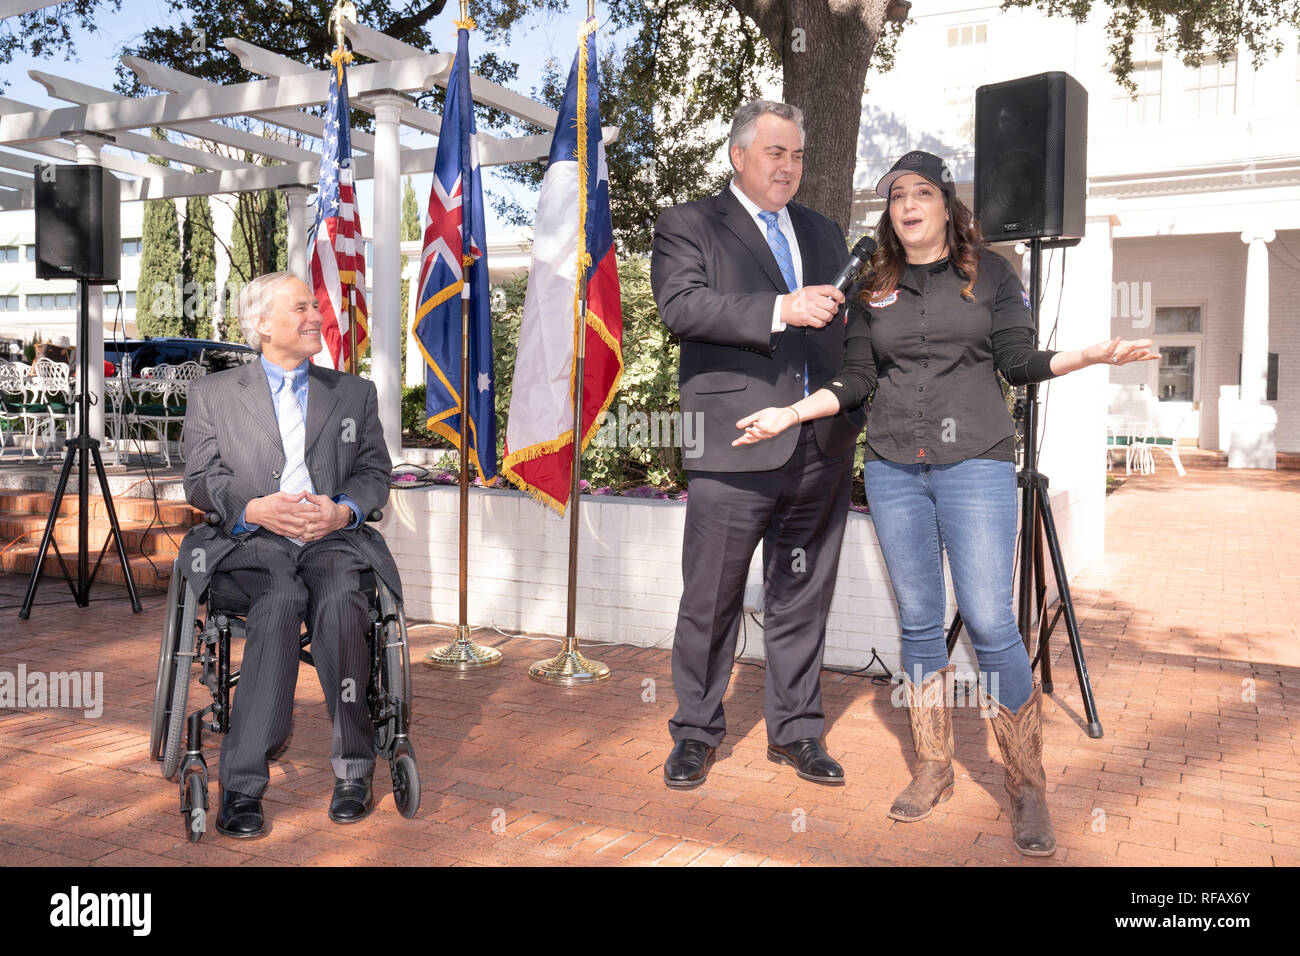 Joe Hockey, Australian ambassador to the United States, talks with barbecue chef and cookbook author Jess Pryles of Melbourne and Austin, TX, as he visits with Texas Gov. Greg Abbott (in wheelchair) during the Great Mates Australia-Texas Barbecue at the Governor's Mansion. Abbott and Hockey worked to strengthen ties between the allies discussing agriculture and high tech before eating Australian Vegemite burnt ends and HeartBrand Akaushi beef. Stock Photo